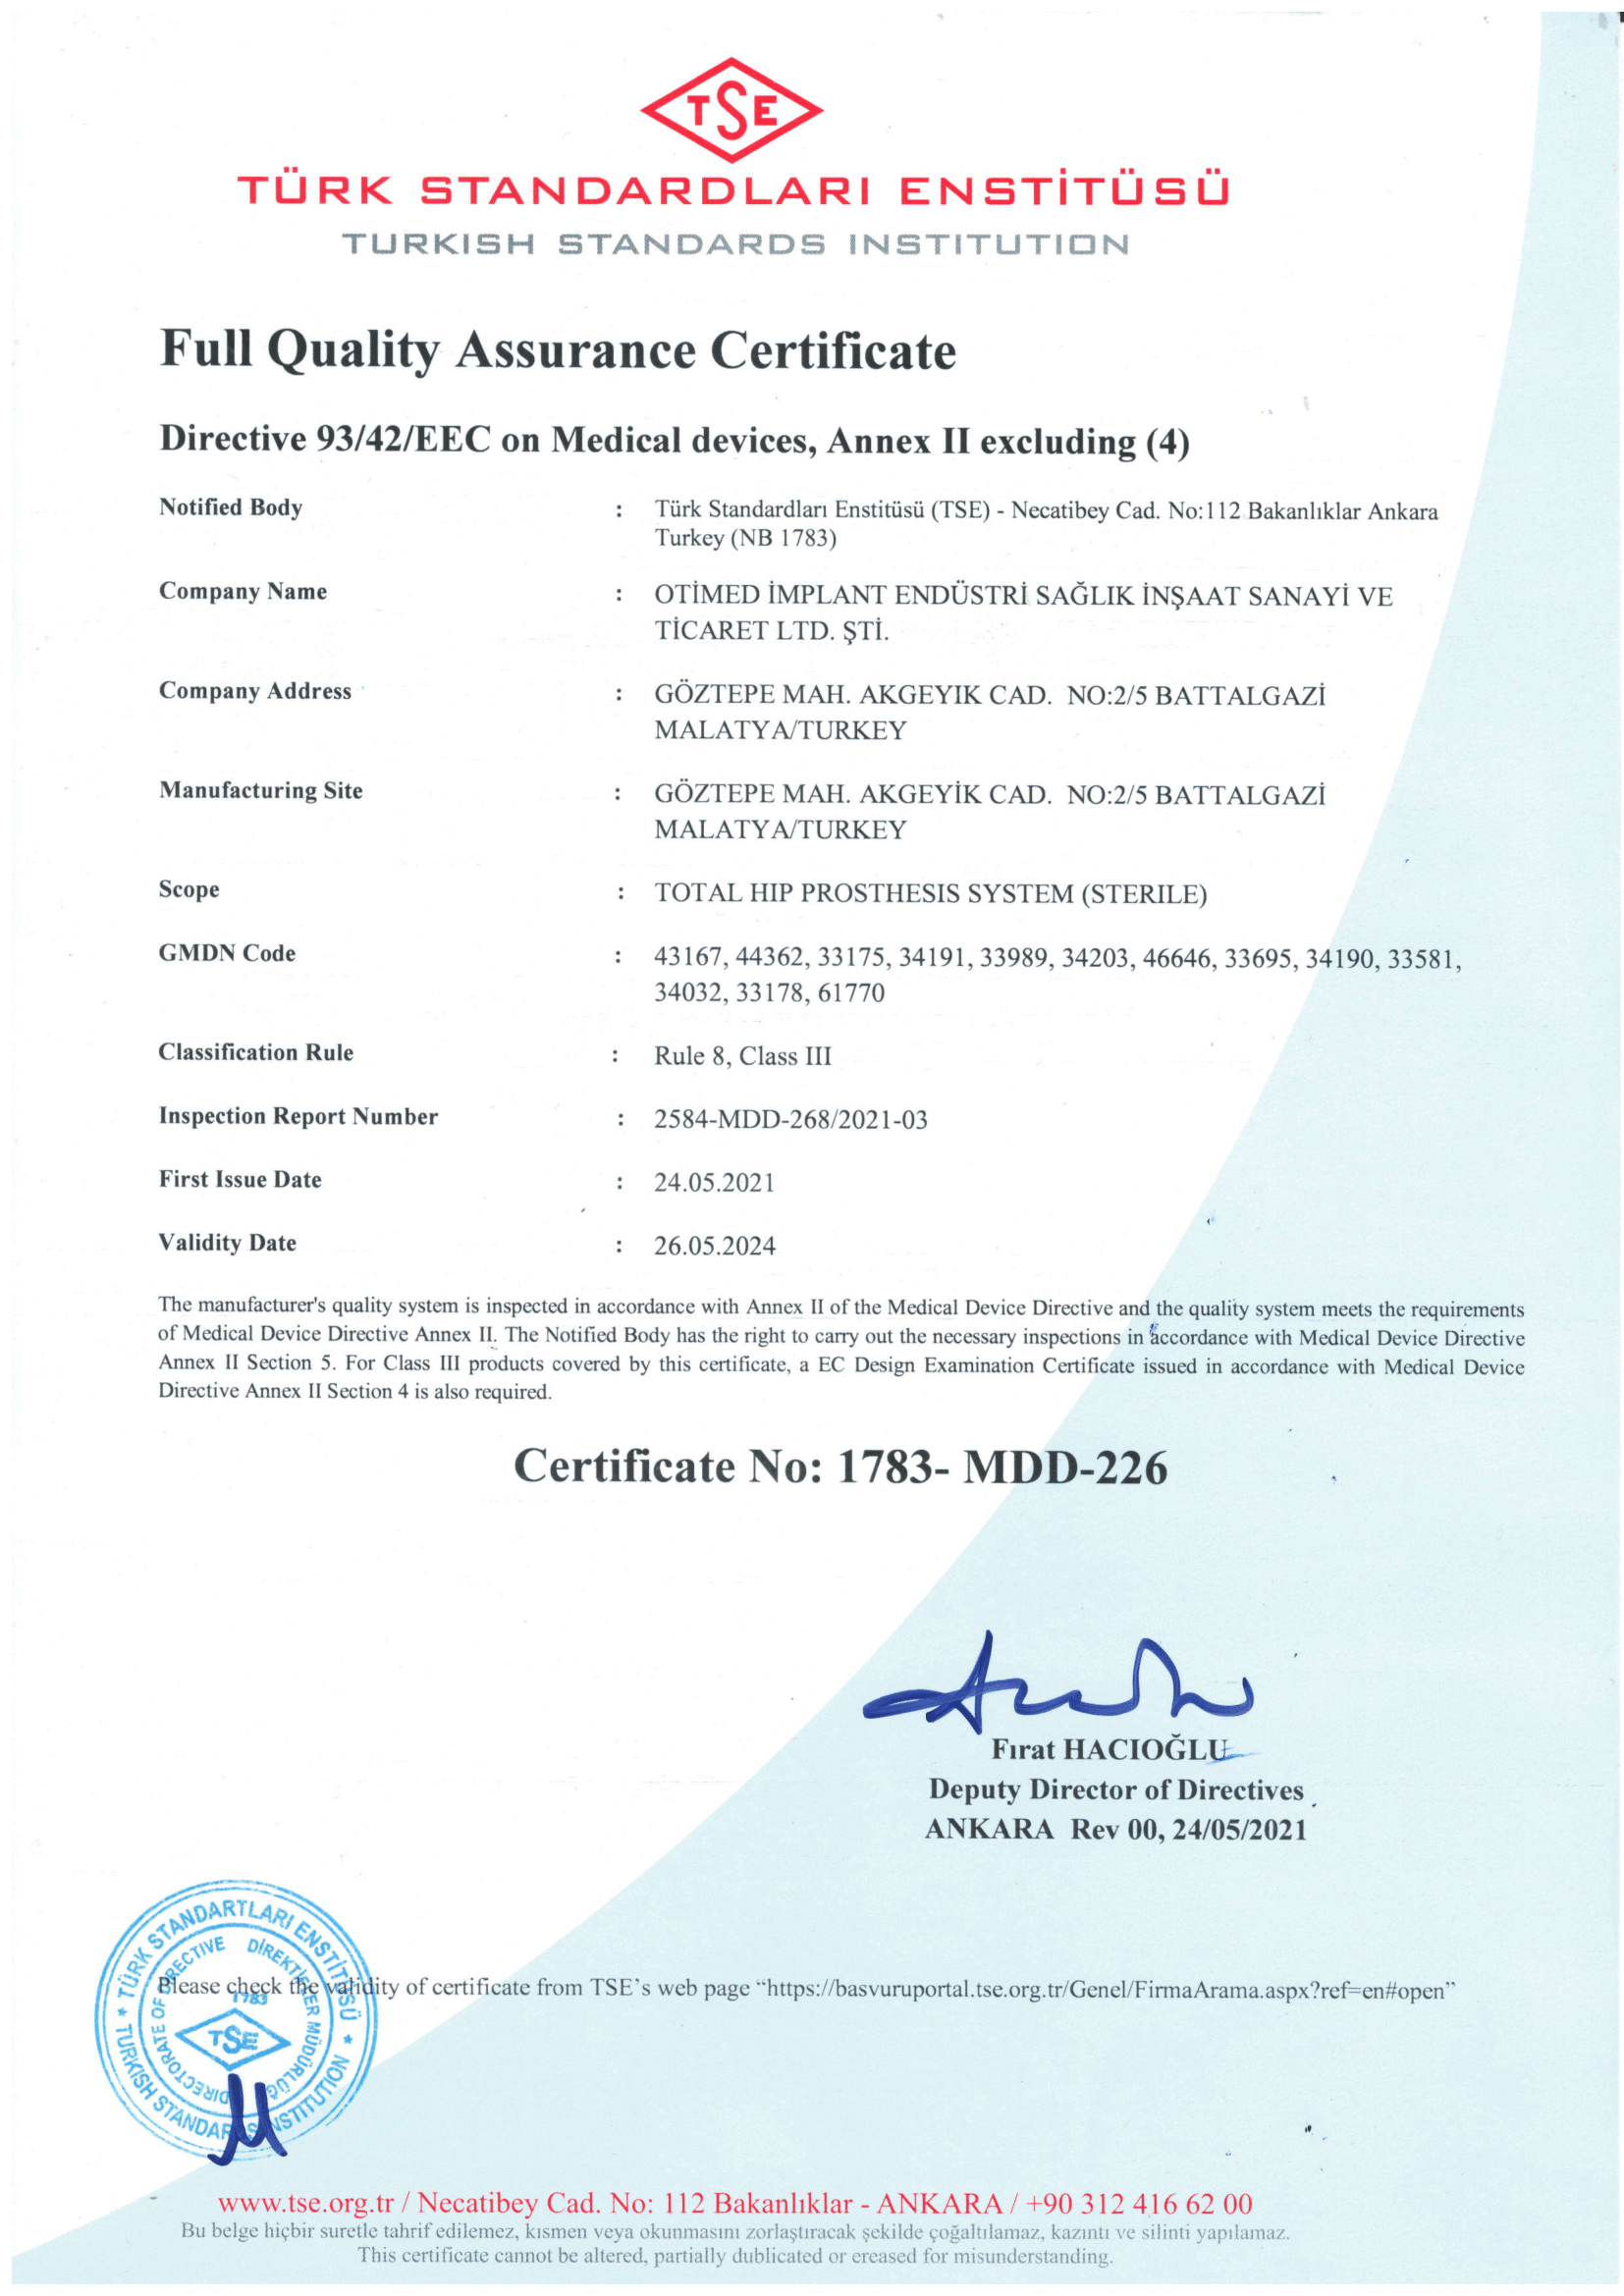 Hip Prosthesis / Full Quality Assurance Certificate